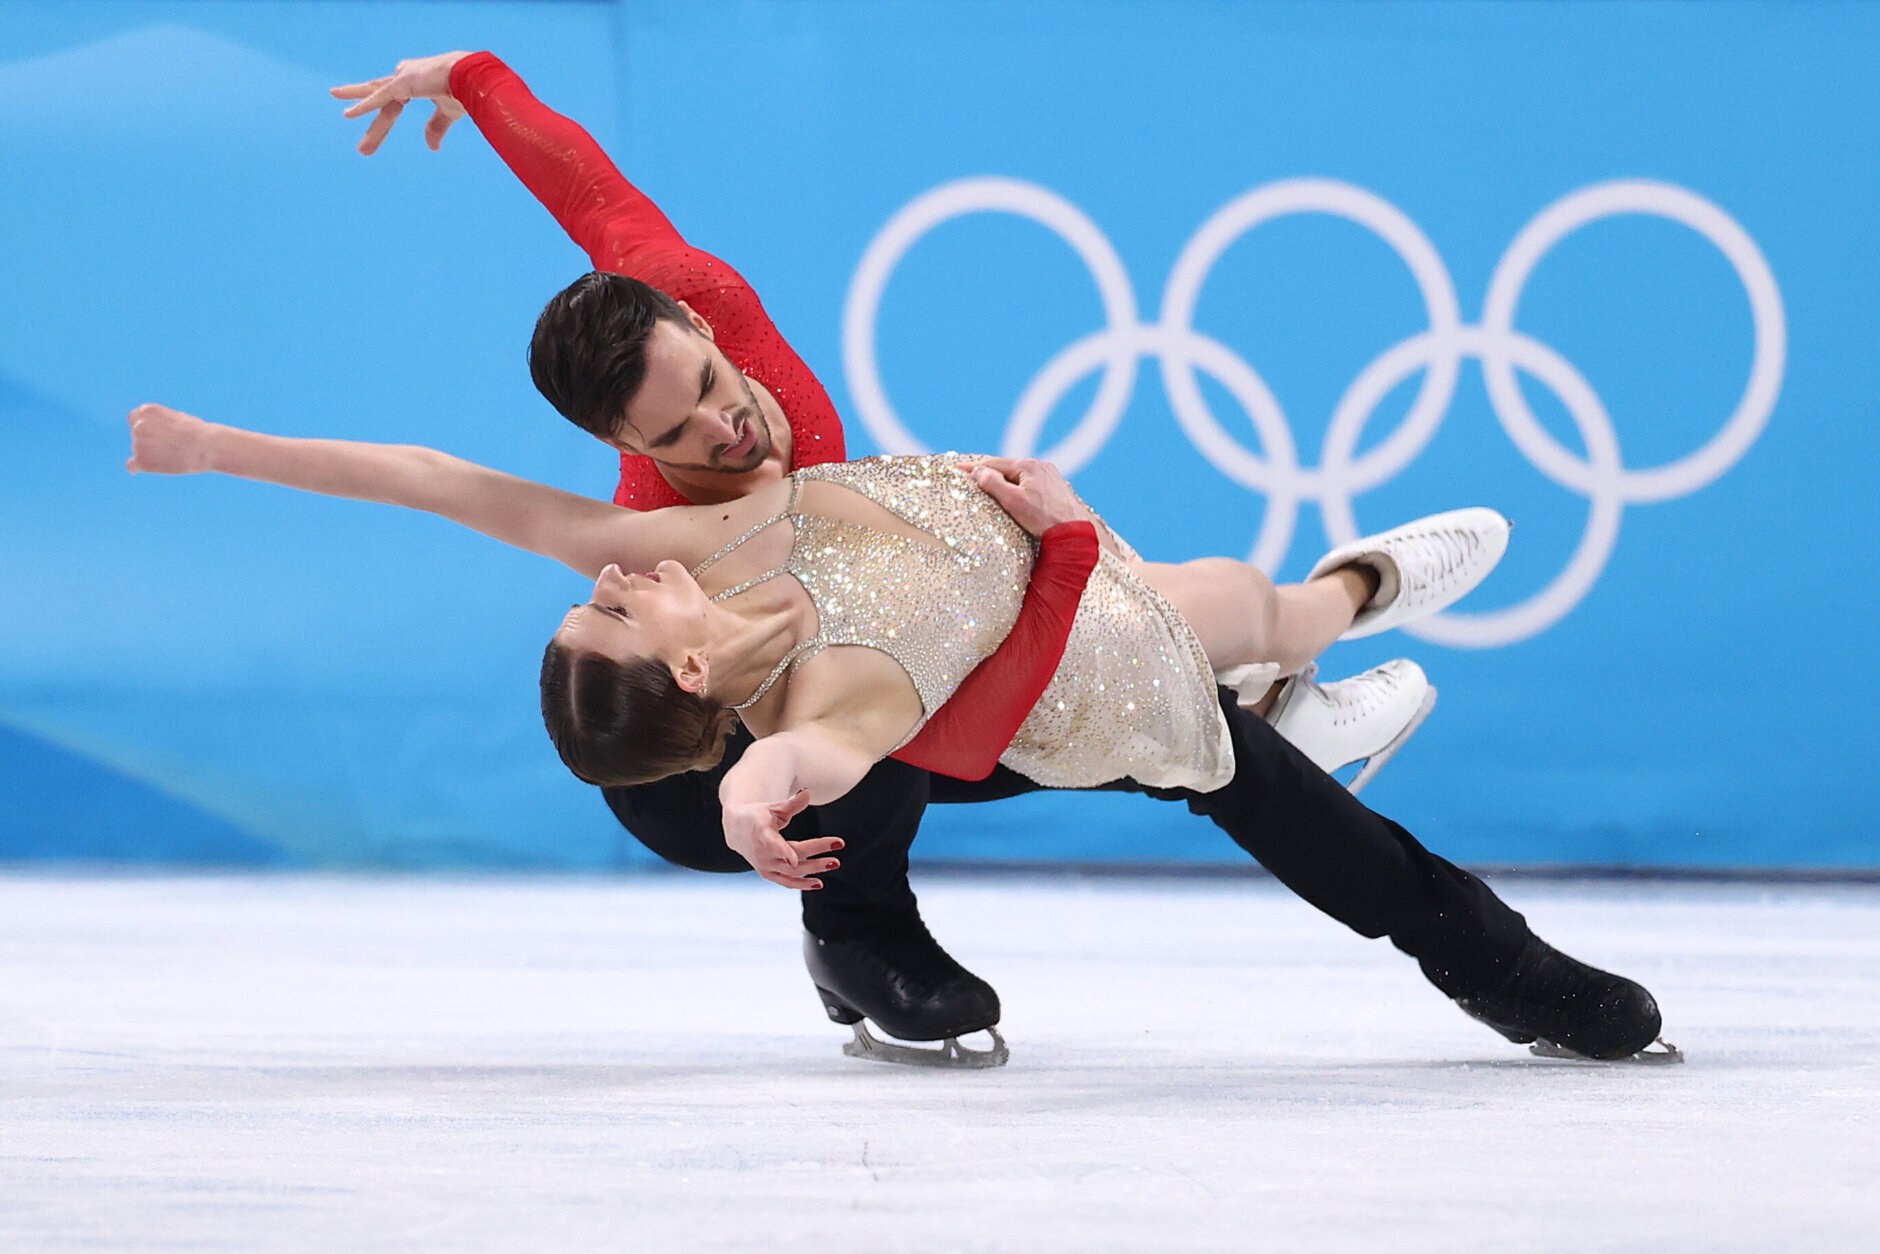 BEIJING, CHINA - FEBRUARY 14: Gabriella Papadakis and Guillaume Cizeron of Team France skate during the Ice Dance Free Dance on day ten of the Beijing 2022 Winter Olympic Games at Capital Indoor Stadium on February 14, 2022 in Beijing, China. (Photo by Dean Mouhtaropoulos/Getty Images)